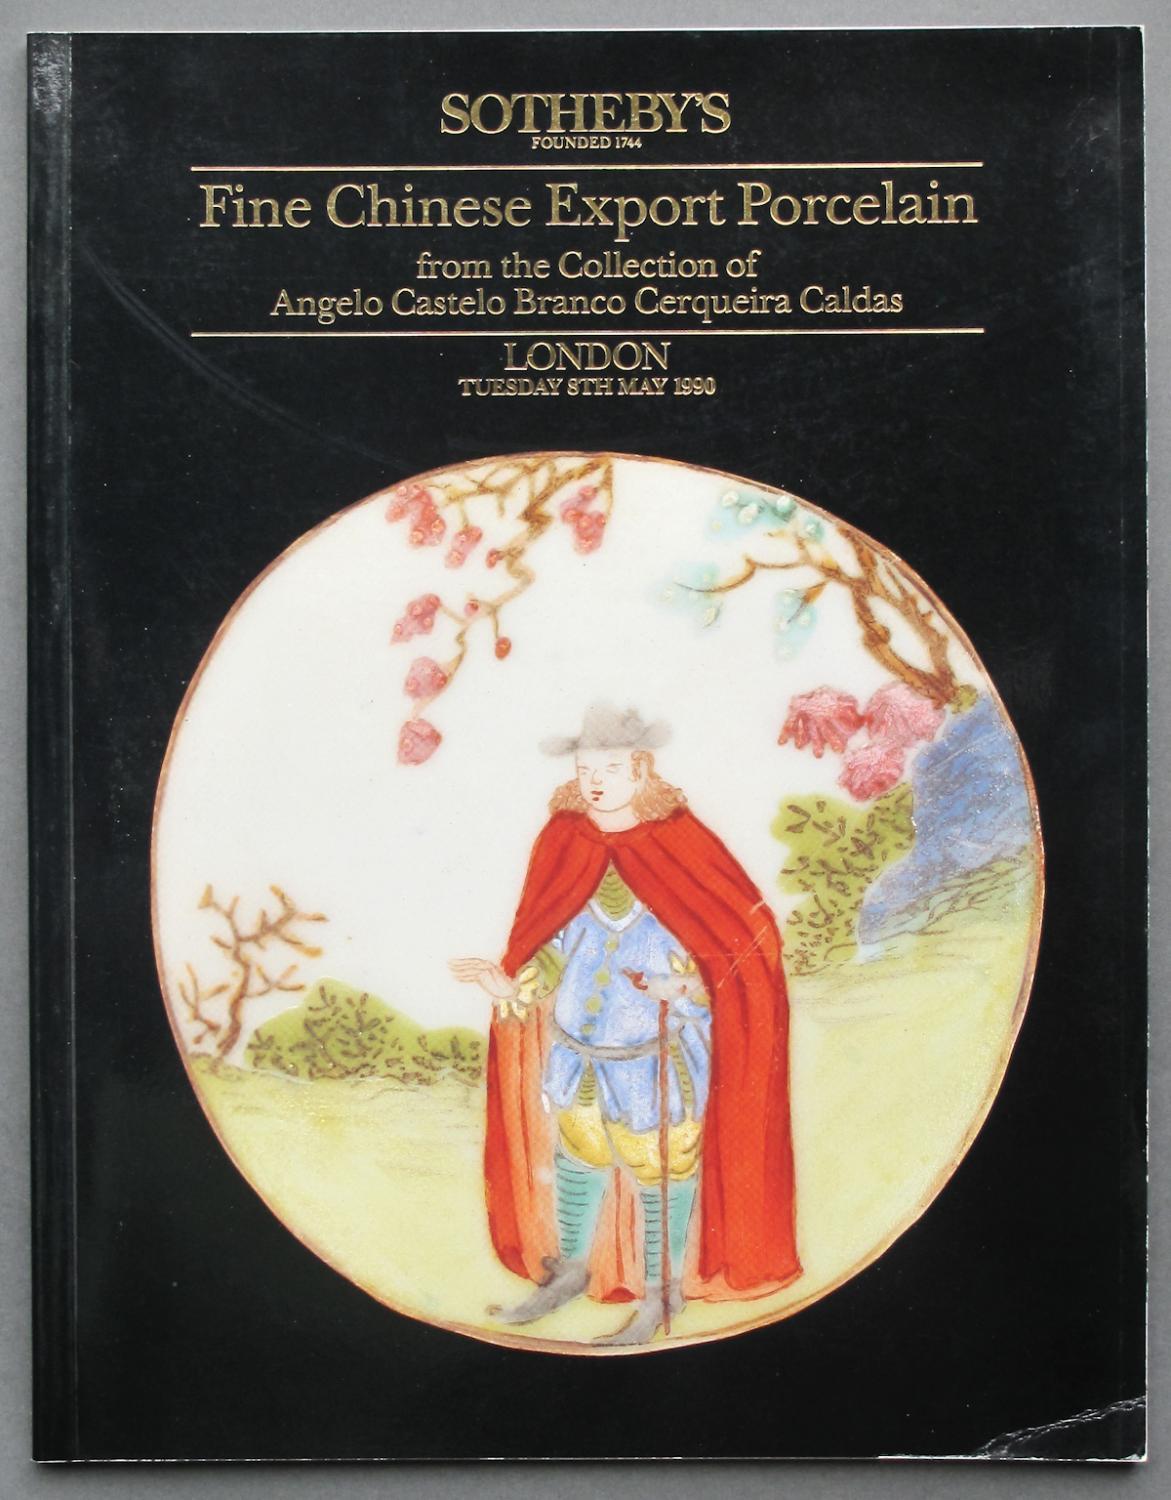 Sotheby's Fine Chinese Export Porcelain